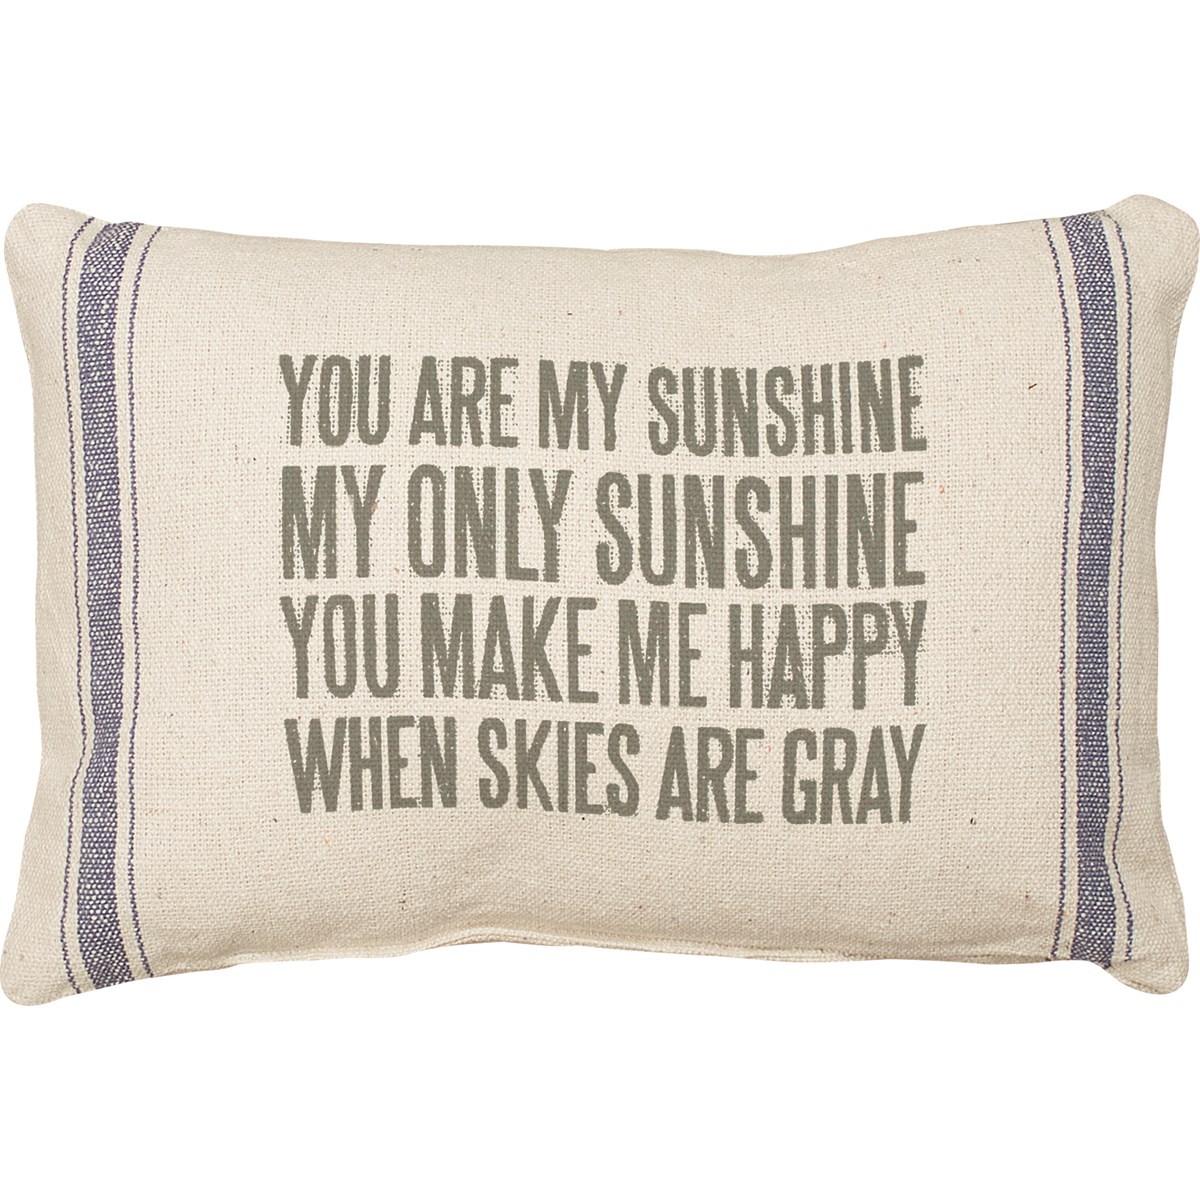 You Are My Sunshine My Only Sunshine Pillow - Cotton, Zipper